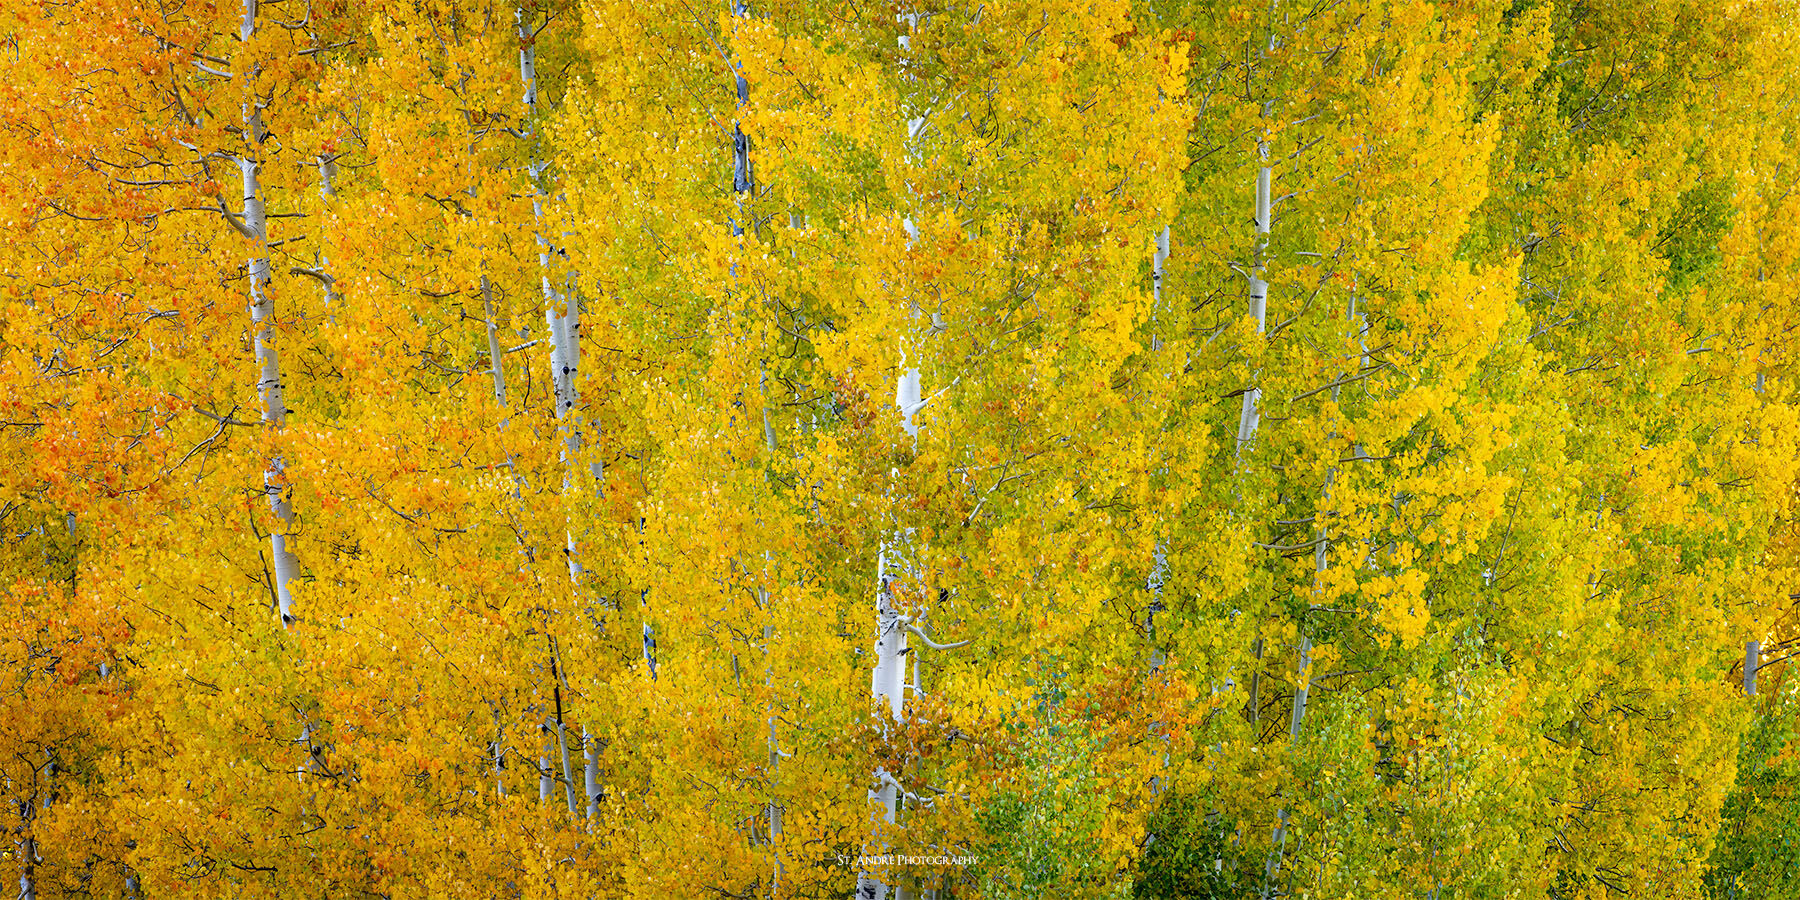 A grove of aspens but only the tops of the trees can be seen. Image taken in southern Utah on Cedar Mountain